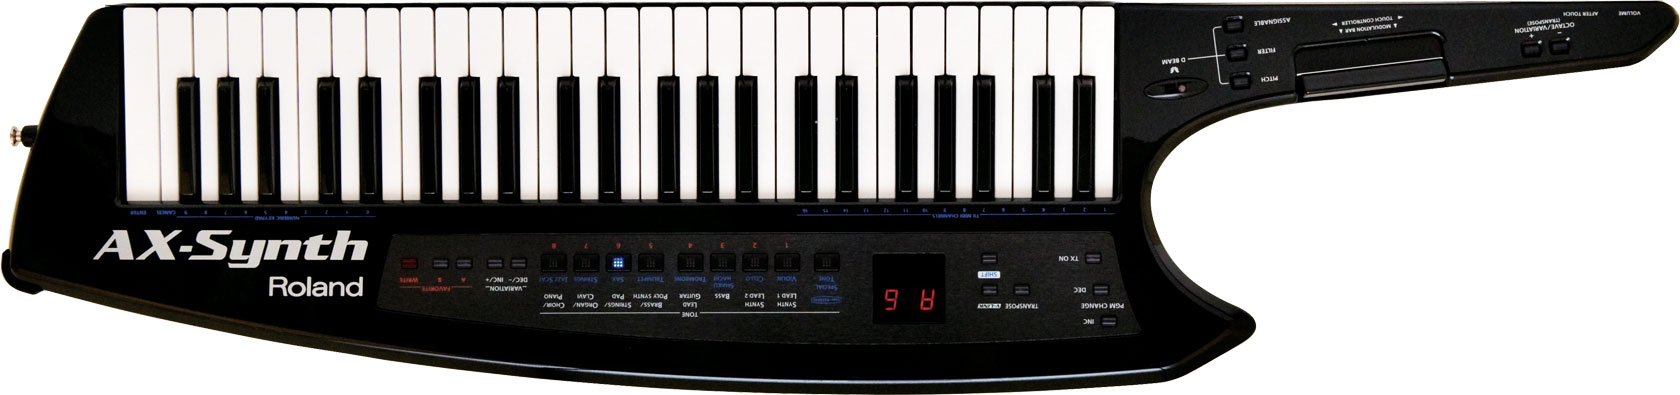 Ax synth roland